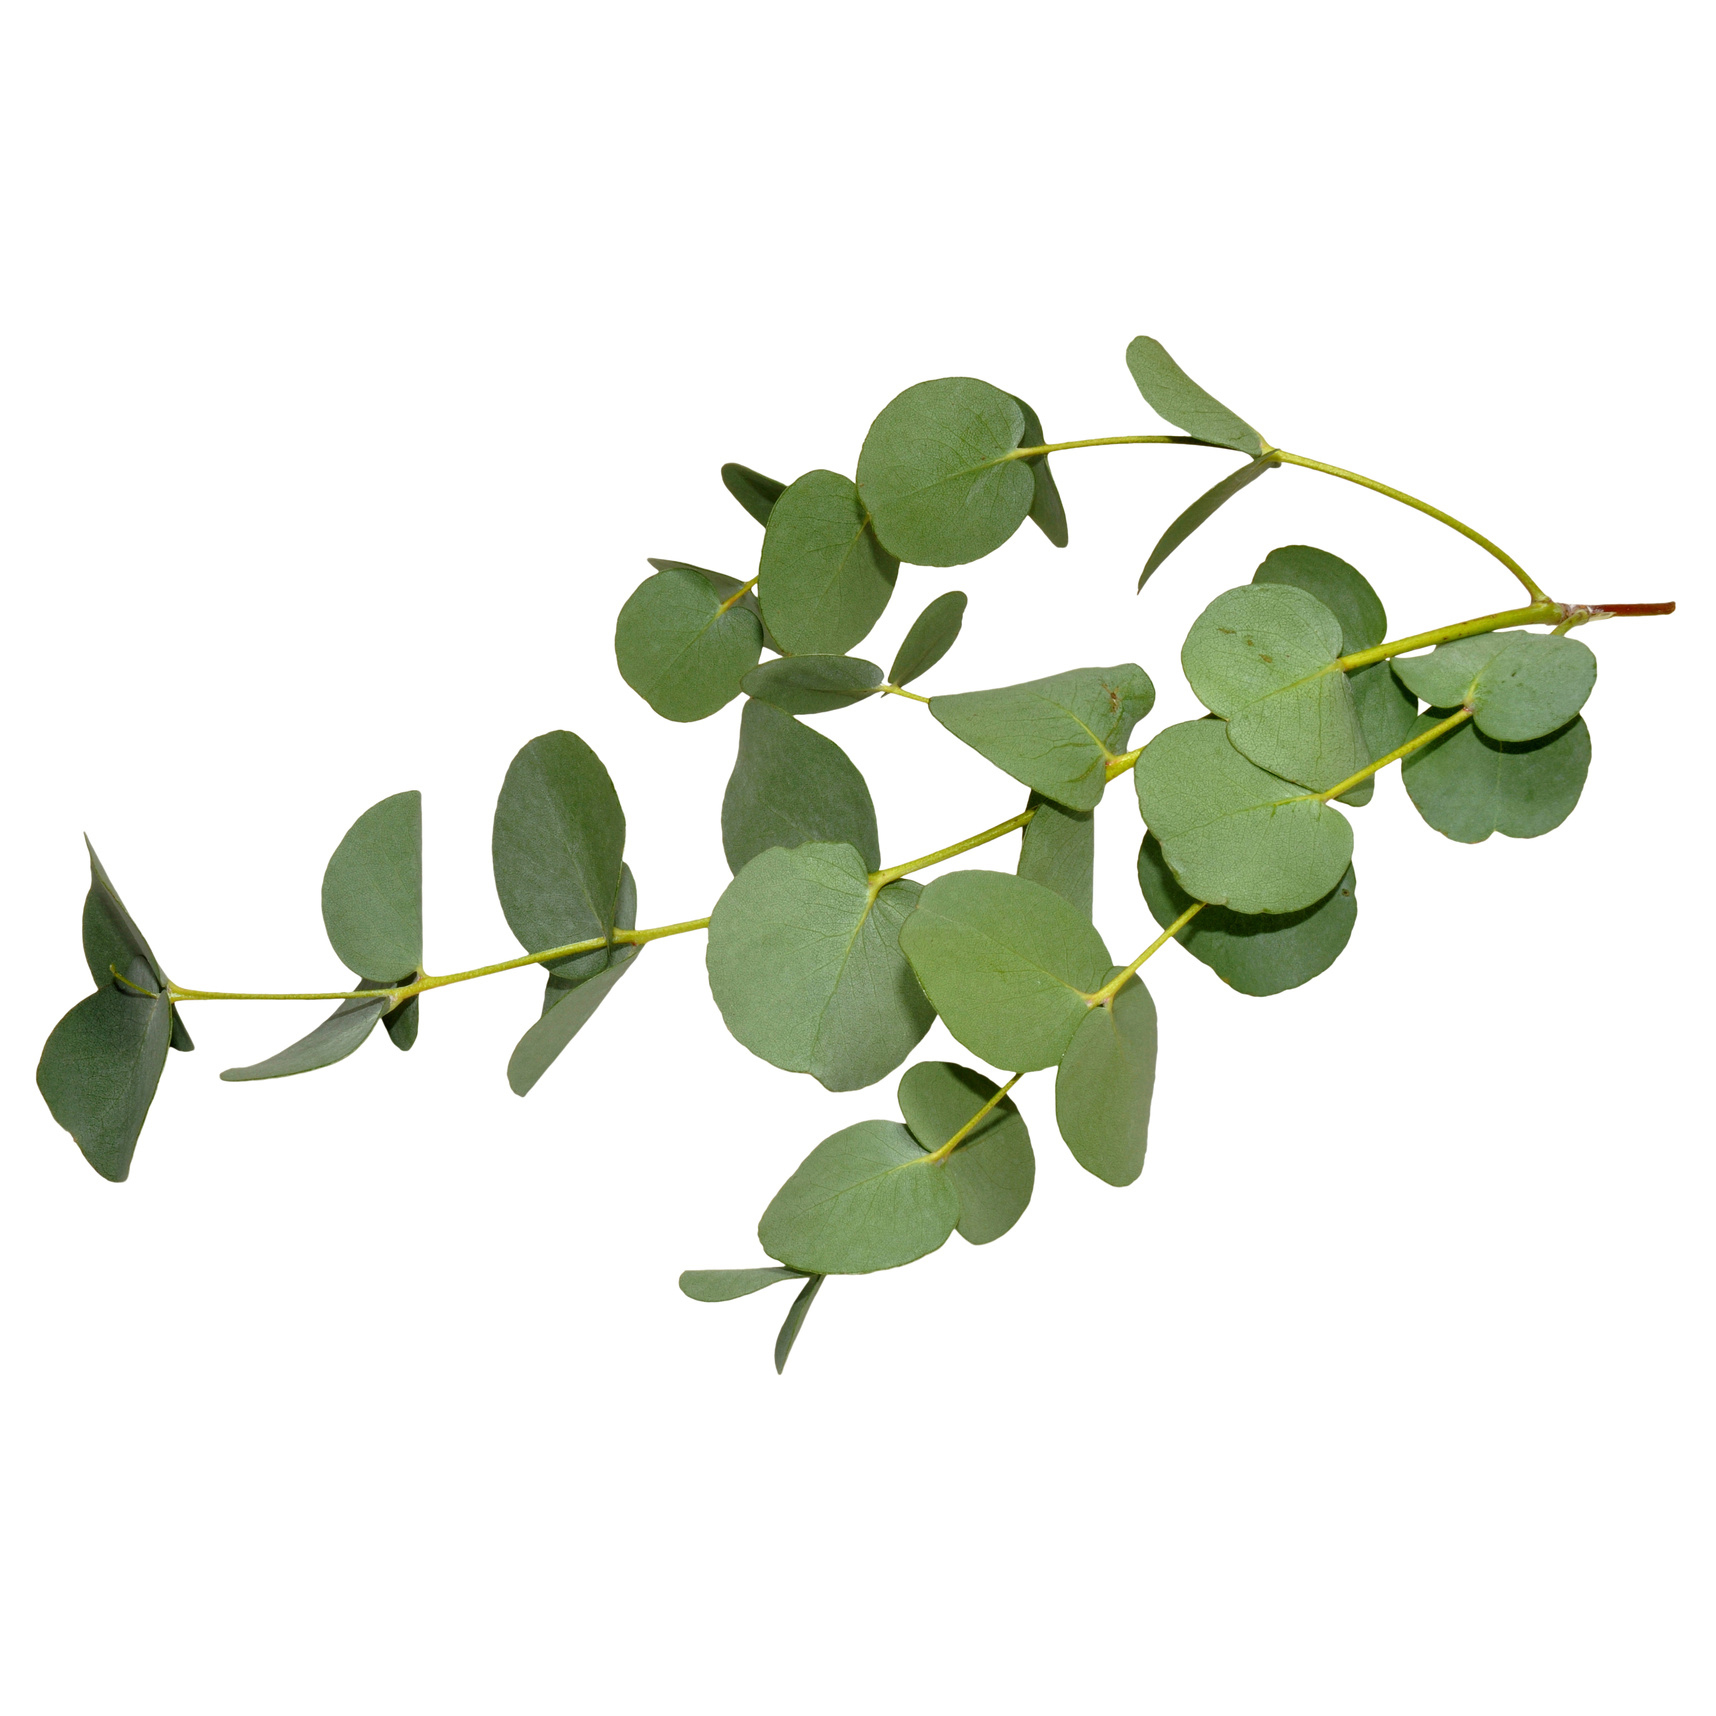 Eucalyptus, an invasive species to CA, is native to Australia. Not a good source of lumber, they are beautiful, some species being delightfully aromatic. The leaves impart a fresh, minty character.